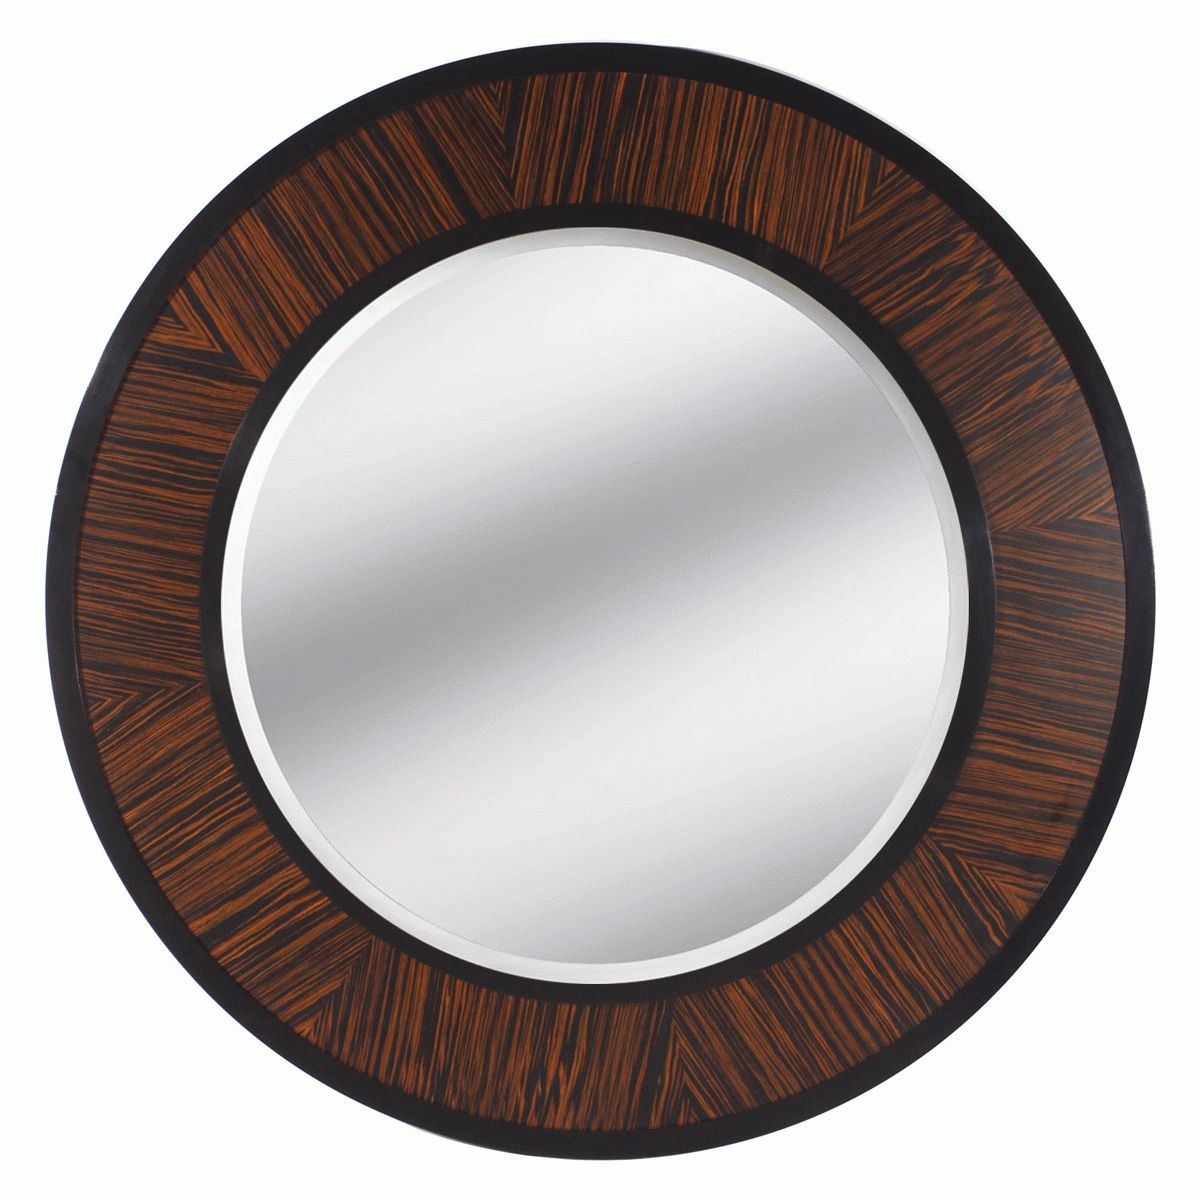 Ebony Macassar Wall Mirrors, Macassar Wall Mirror, Zebrawood Wall With Leather Wall Mirrors (View 23 of 25)